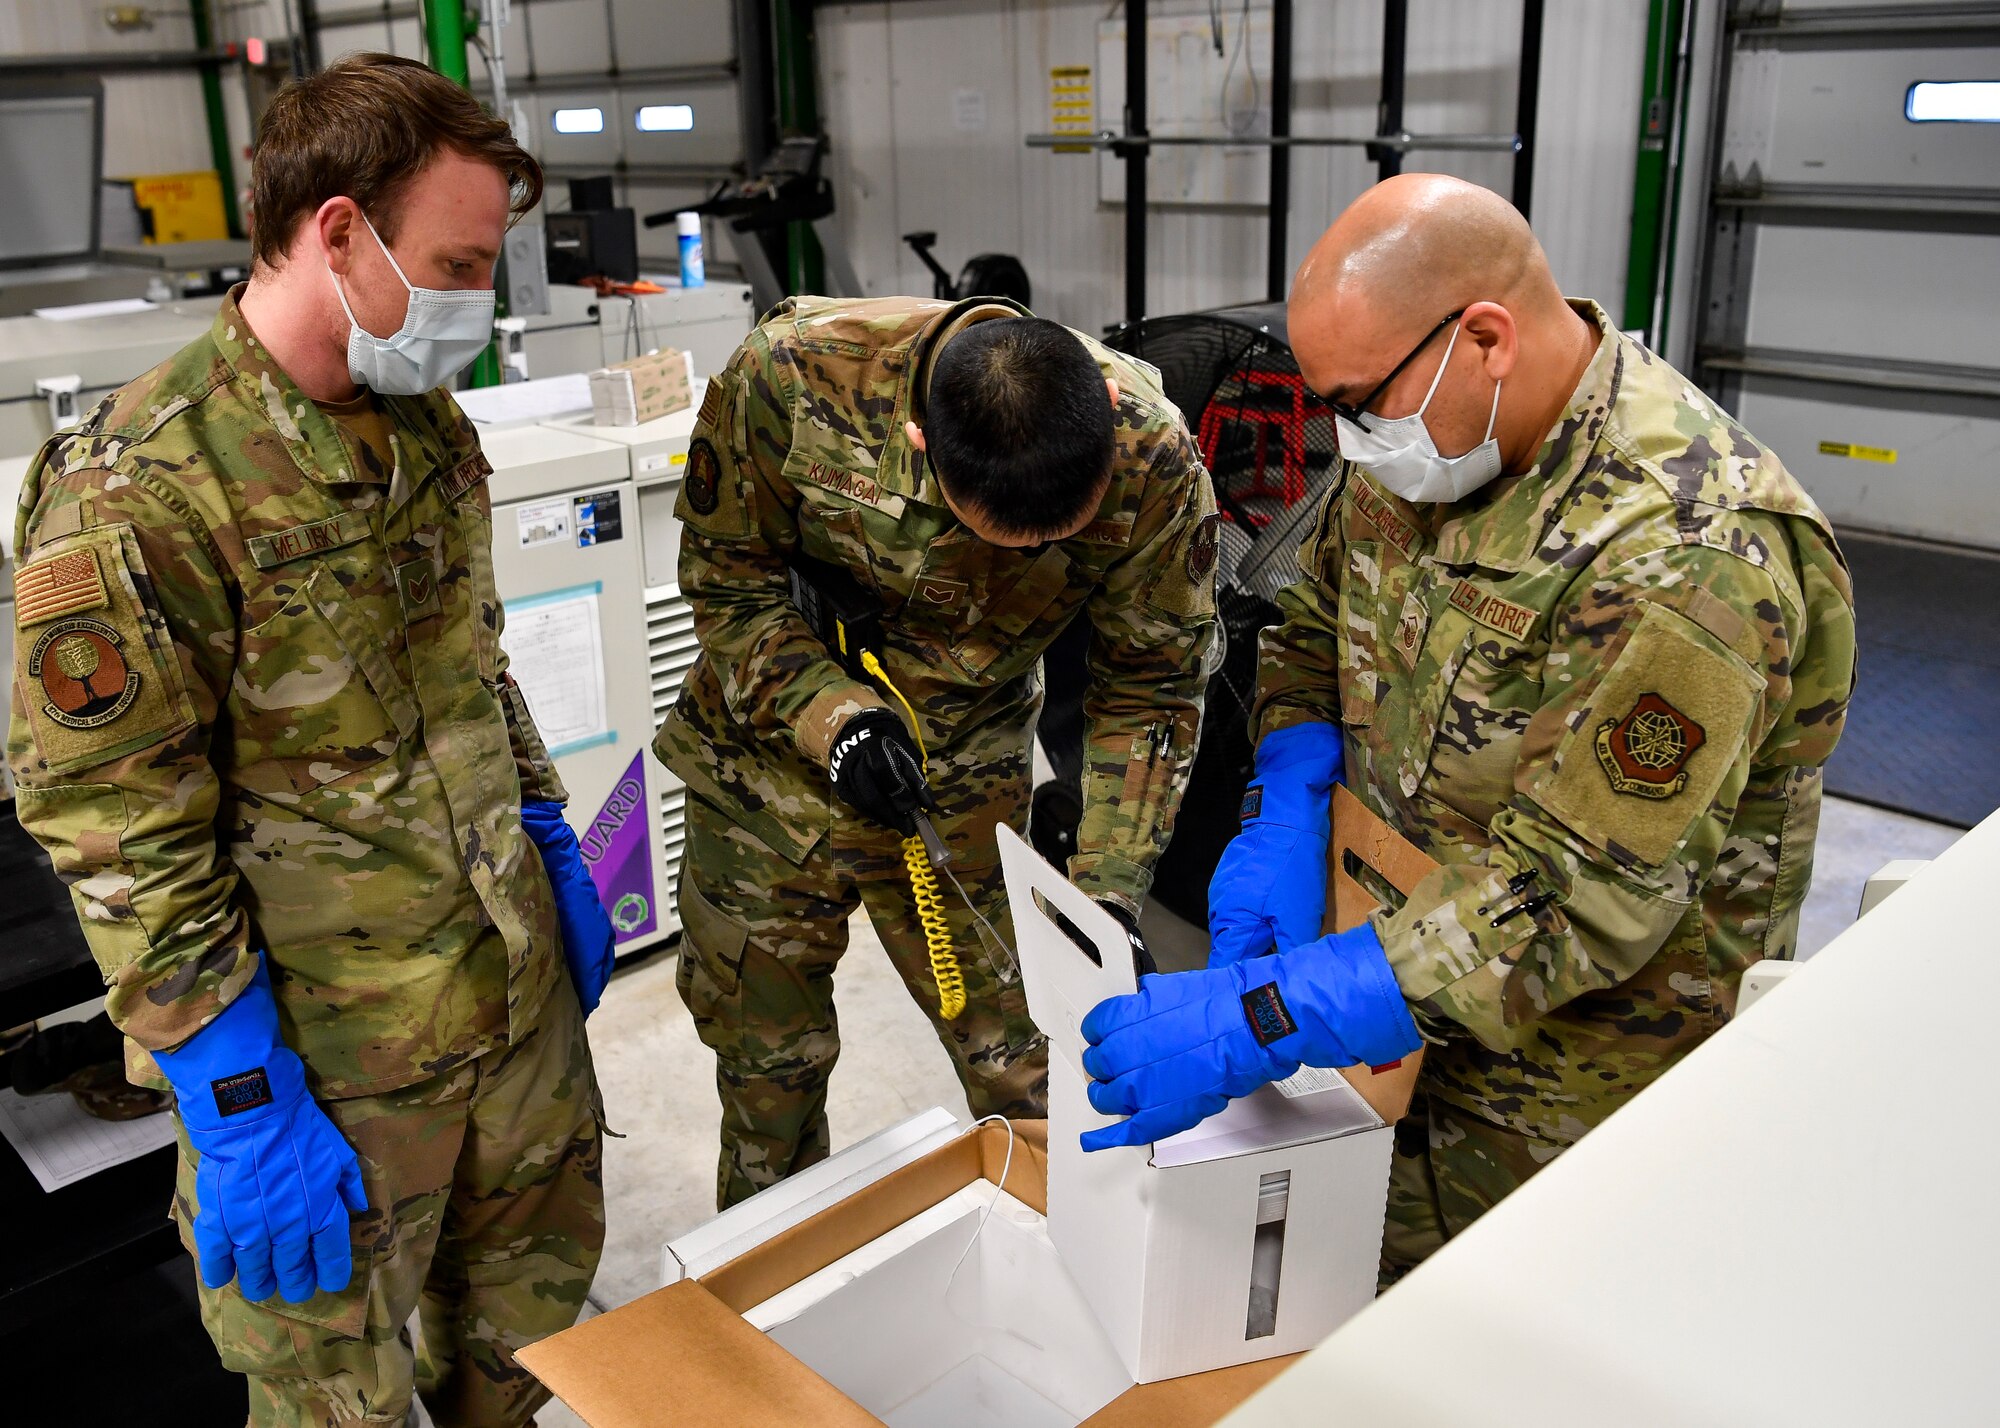 87th Medical Group personnel unpack COVID-19 vaccinations after arriving at Joint Base McGuire-Dix-Lakehurst, New Jersey, Dec. 31, 2020. The vaccines, which must be temperature controlled, were placed into freezers before being sent to the McGuire Fitness Center for distribution. (U.S. Air Force photo by Staff Sgt. Jake Carter)